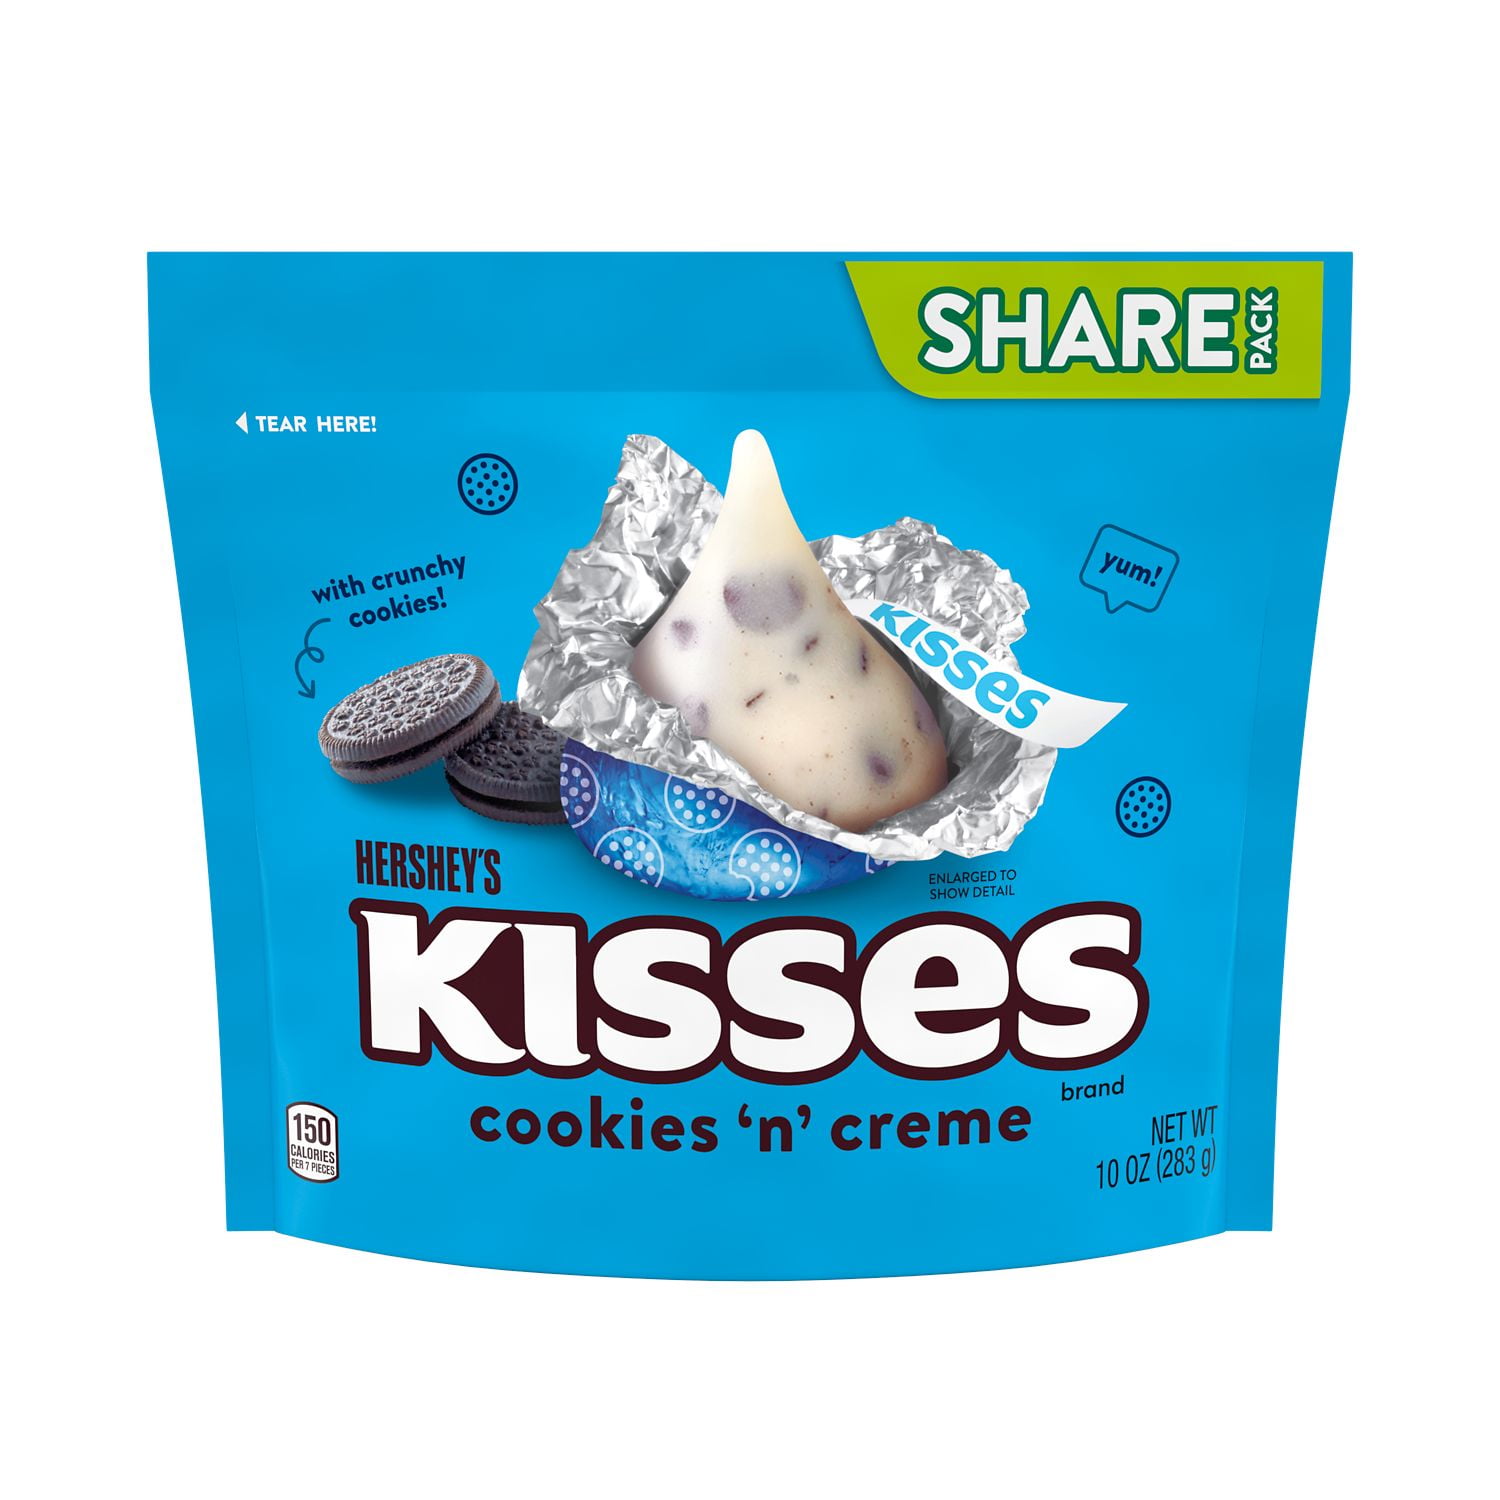 Hershey's, Kisses Cookies 'N' Creme Candy, Individually Wrapped, 10 oz